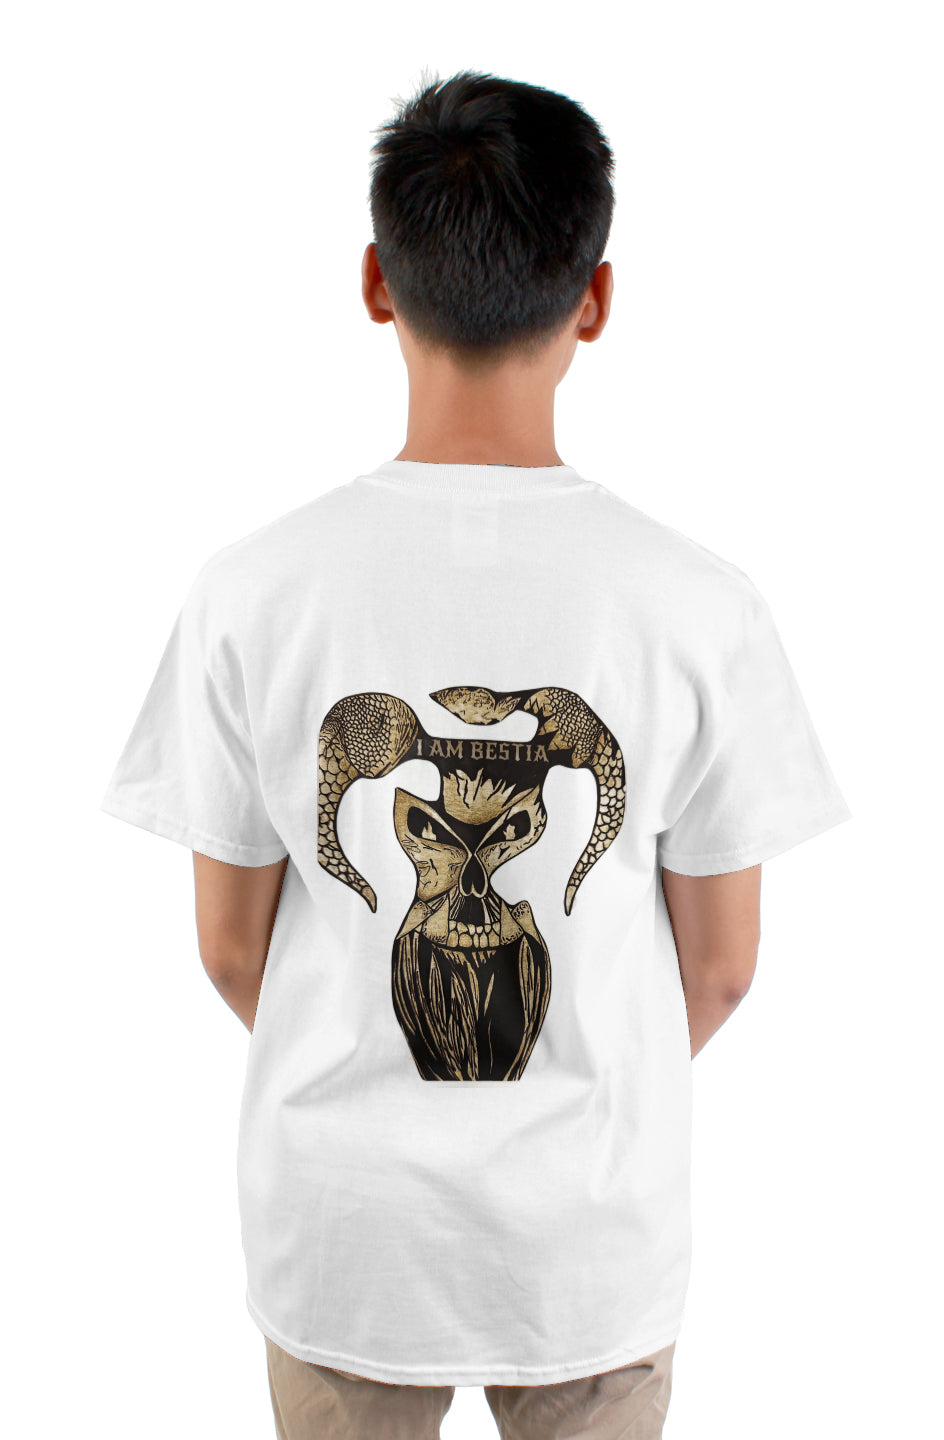 Gold Edition with Artwork T-Shirt